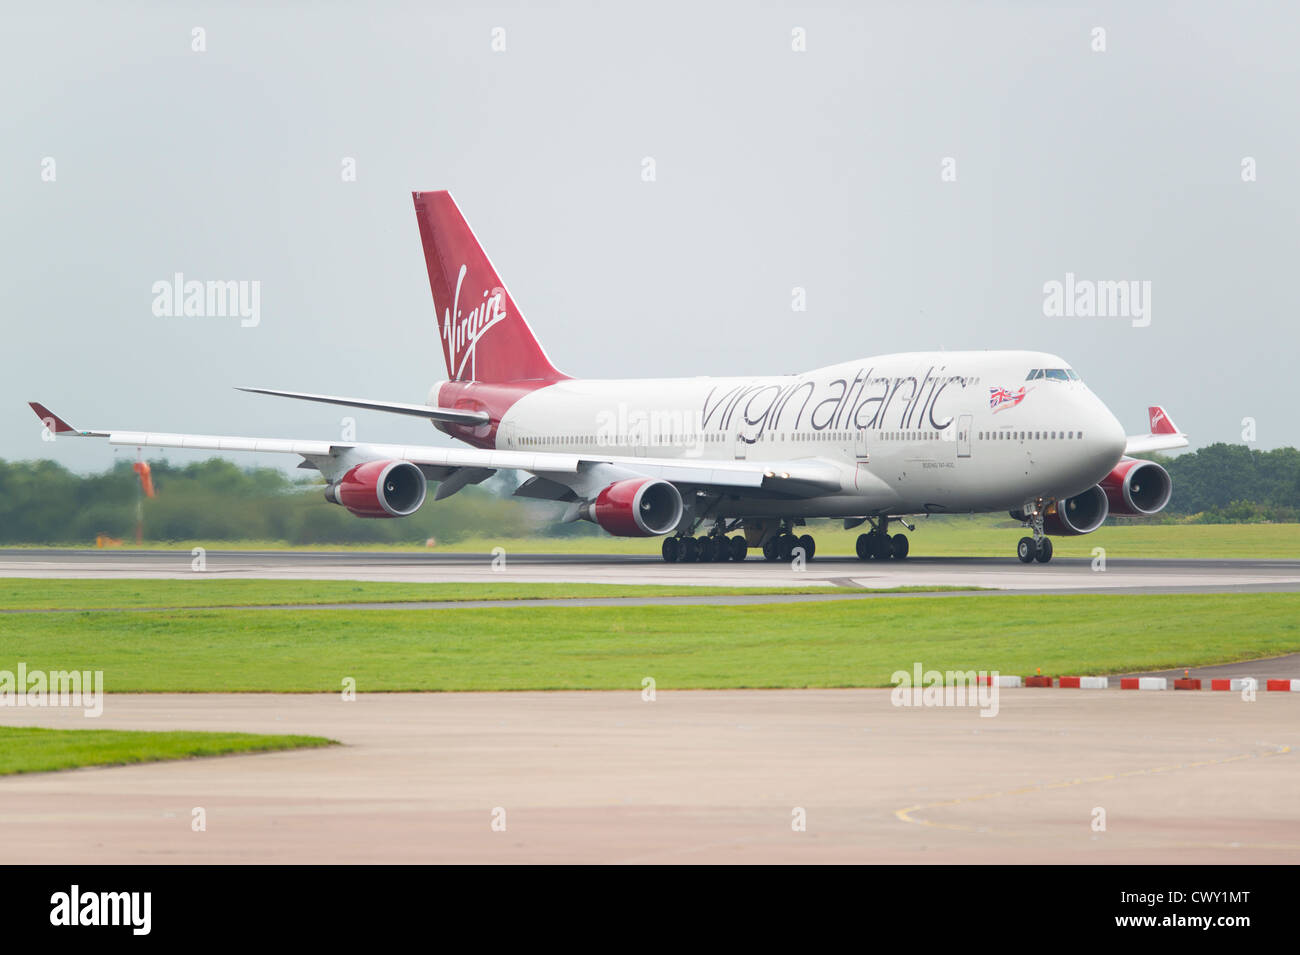 A Virgin Atlantic Boeing 747 Jumbo Jet about to take off from Manchester International Airport (Editorial use only) Stock Photo